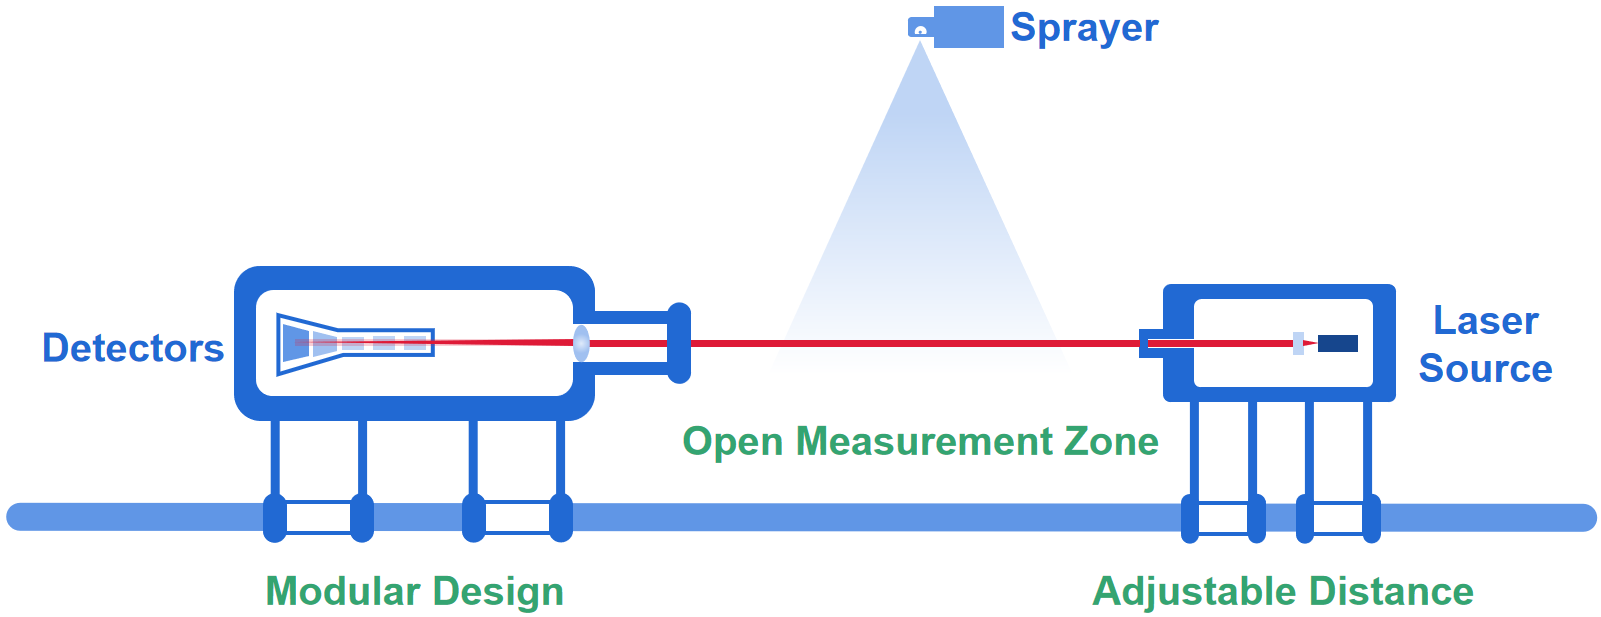 What is a spray particle size analyzer